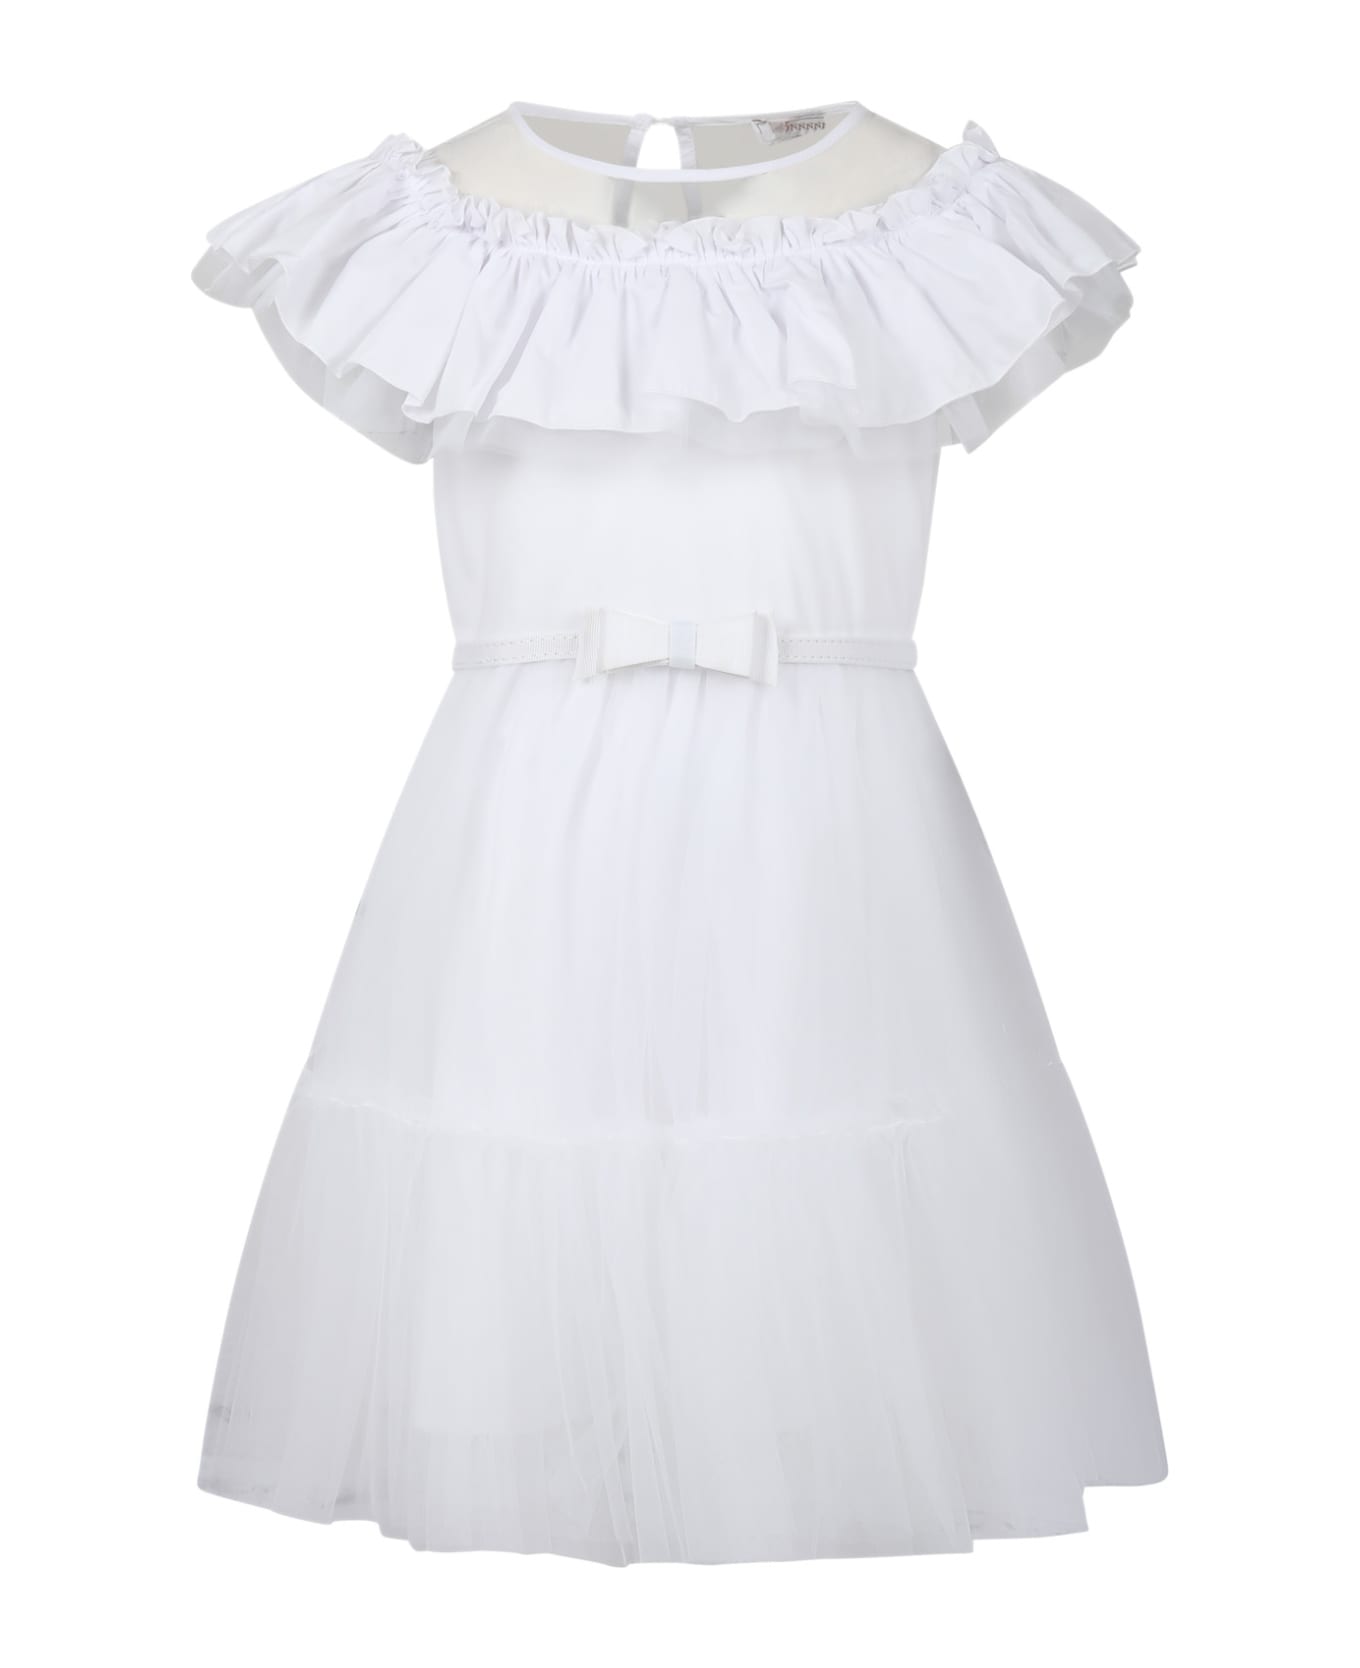 Monnalisa White Dress For Girl With Tulle And Ruffles - White